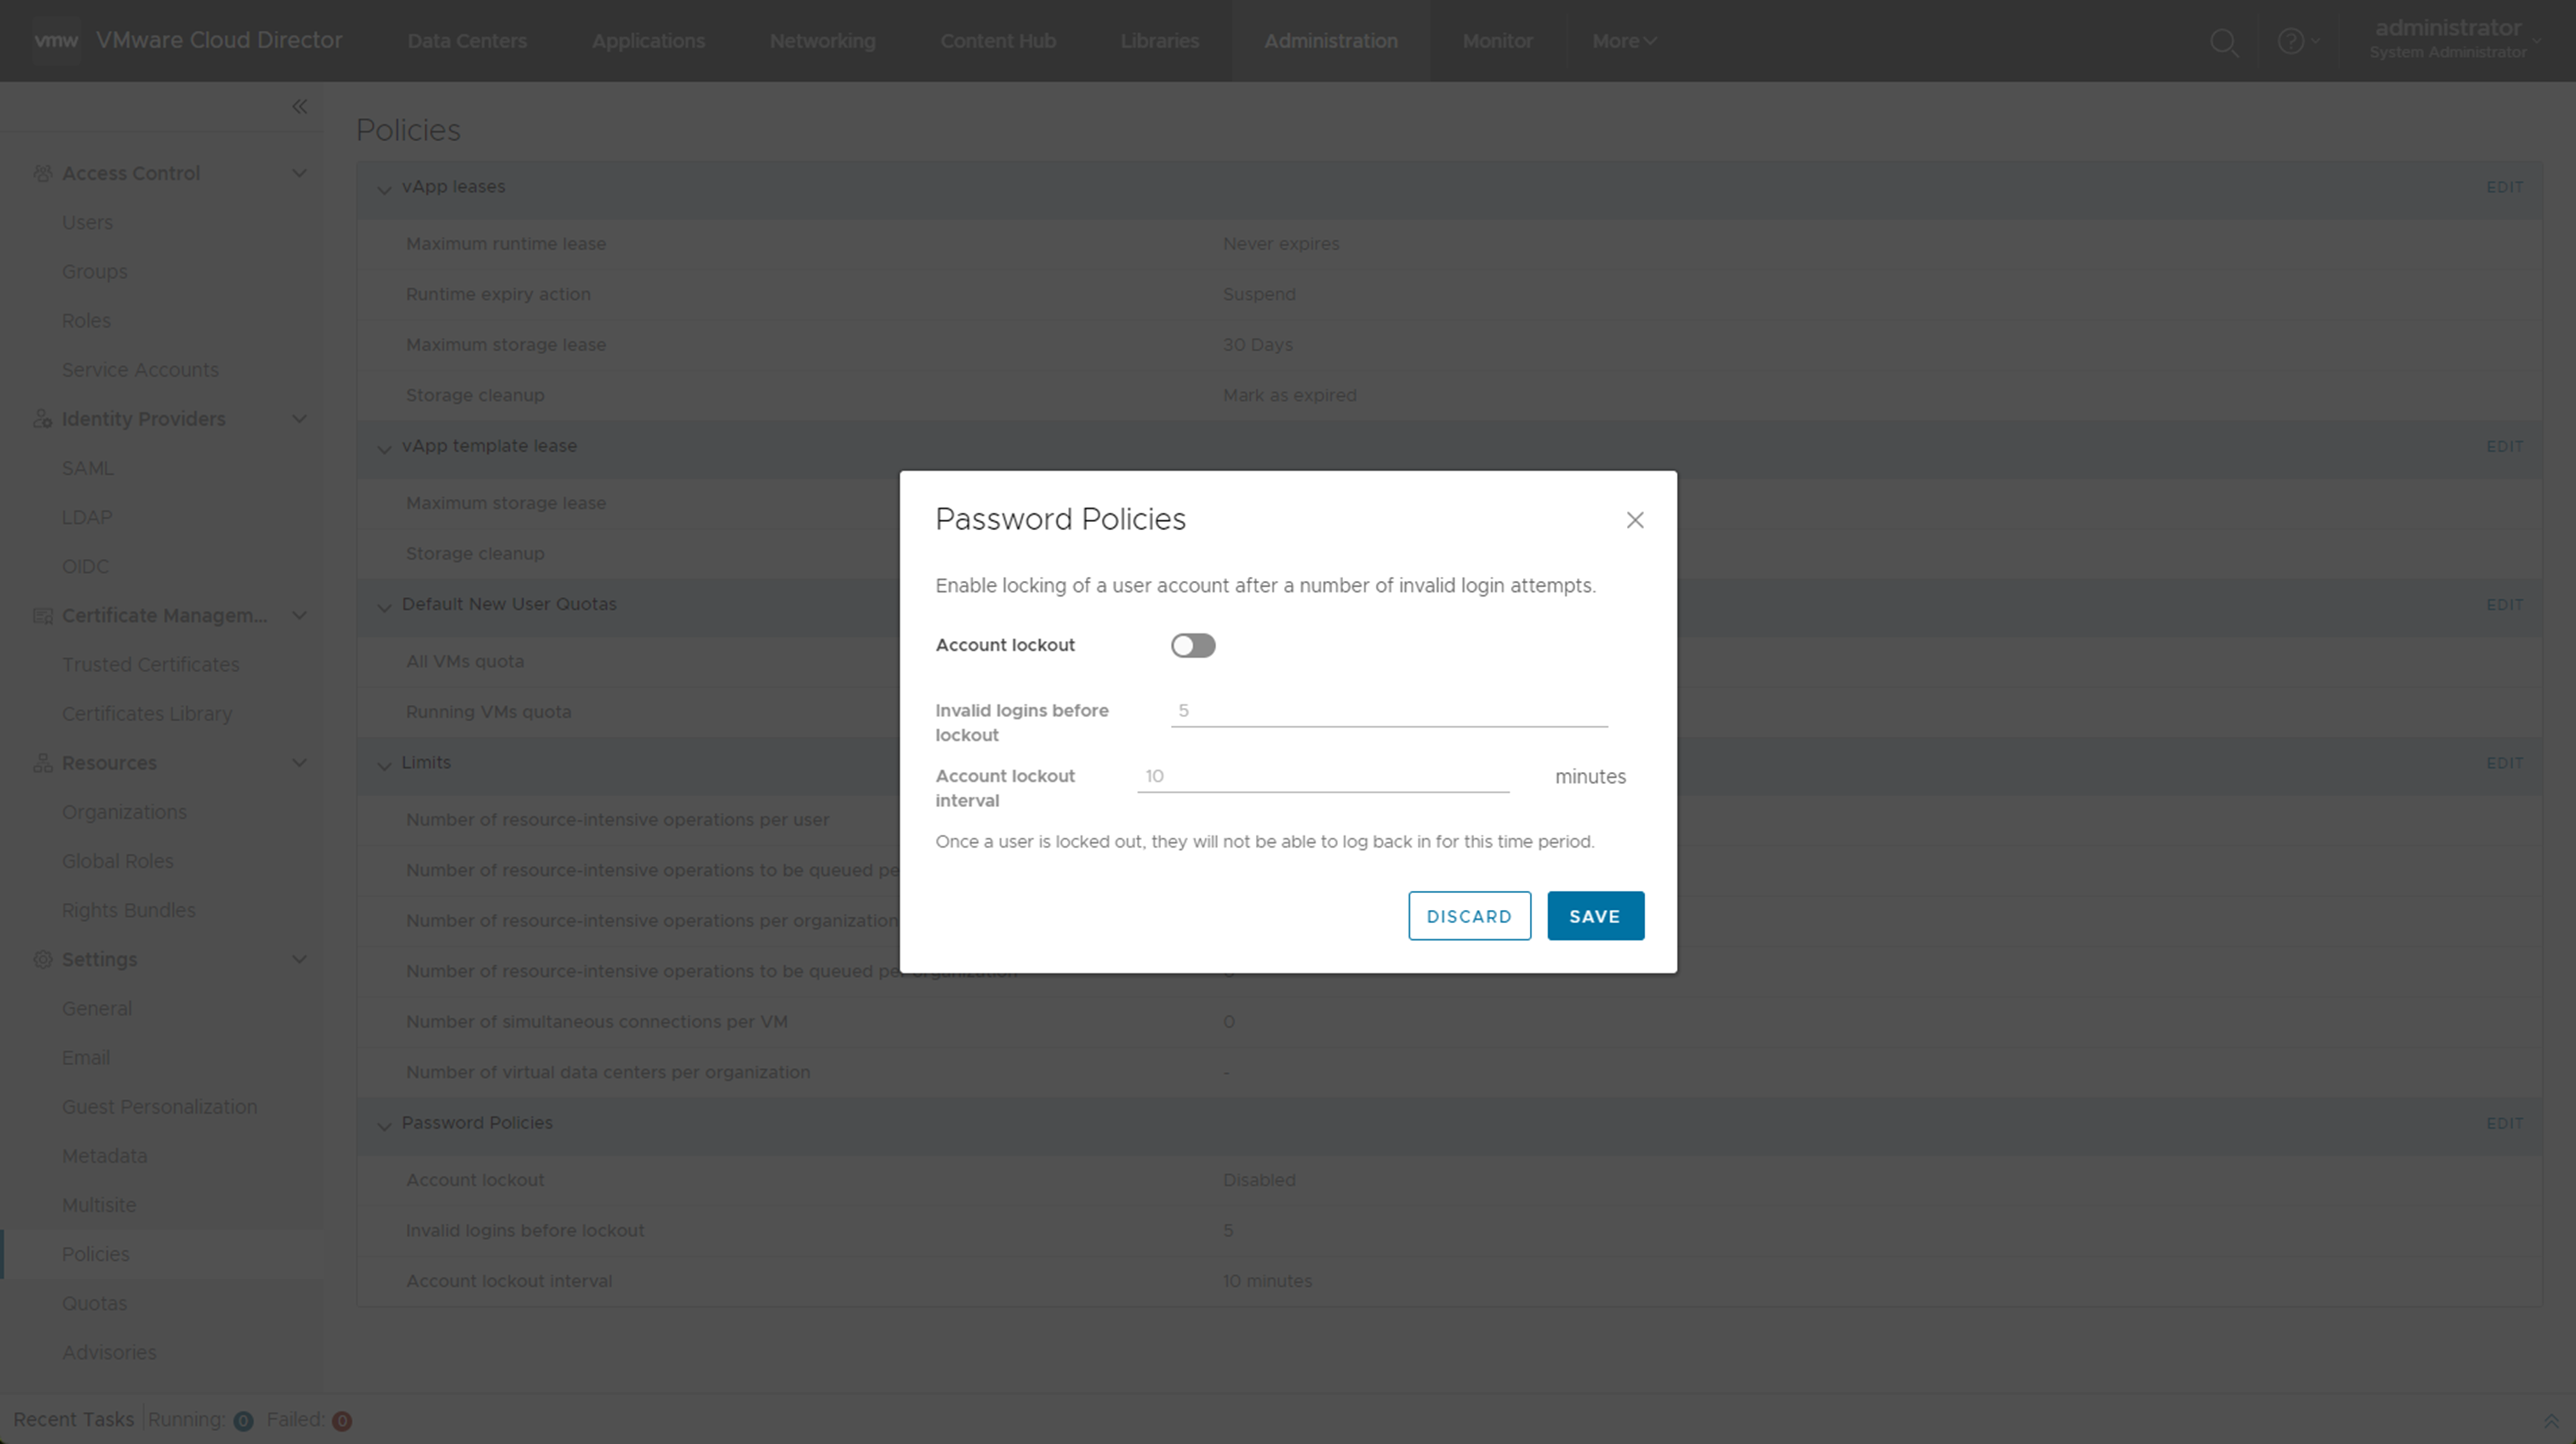 You can edit the password and account policies by using the Edit Password Policy modal.